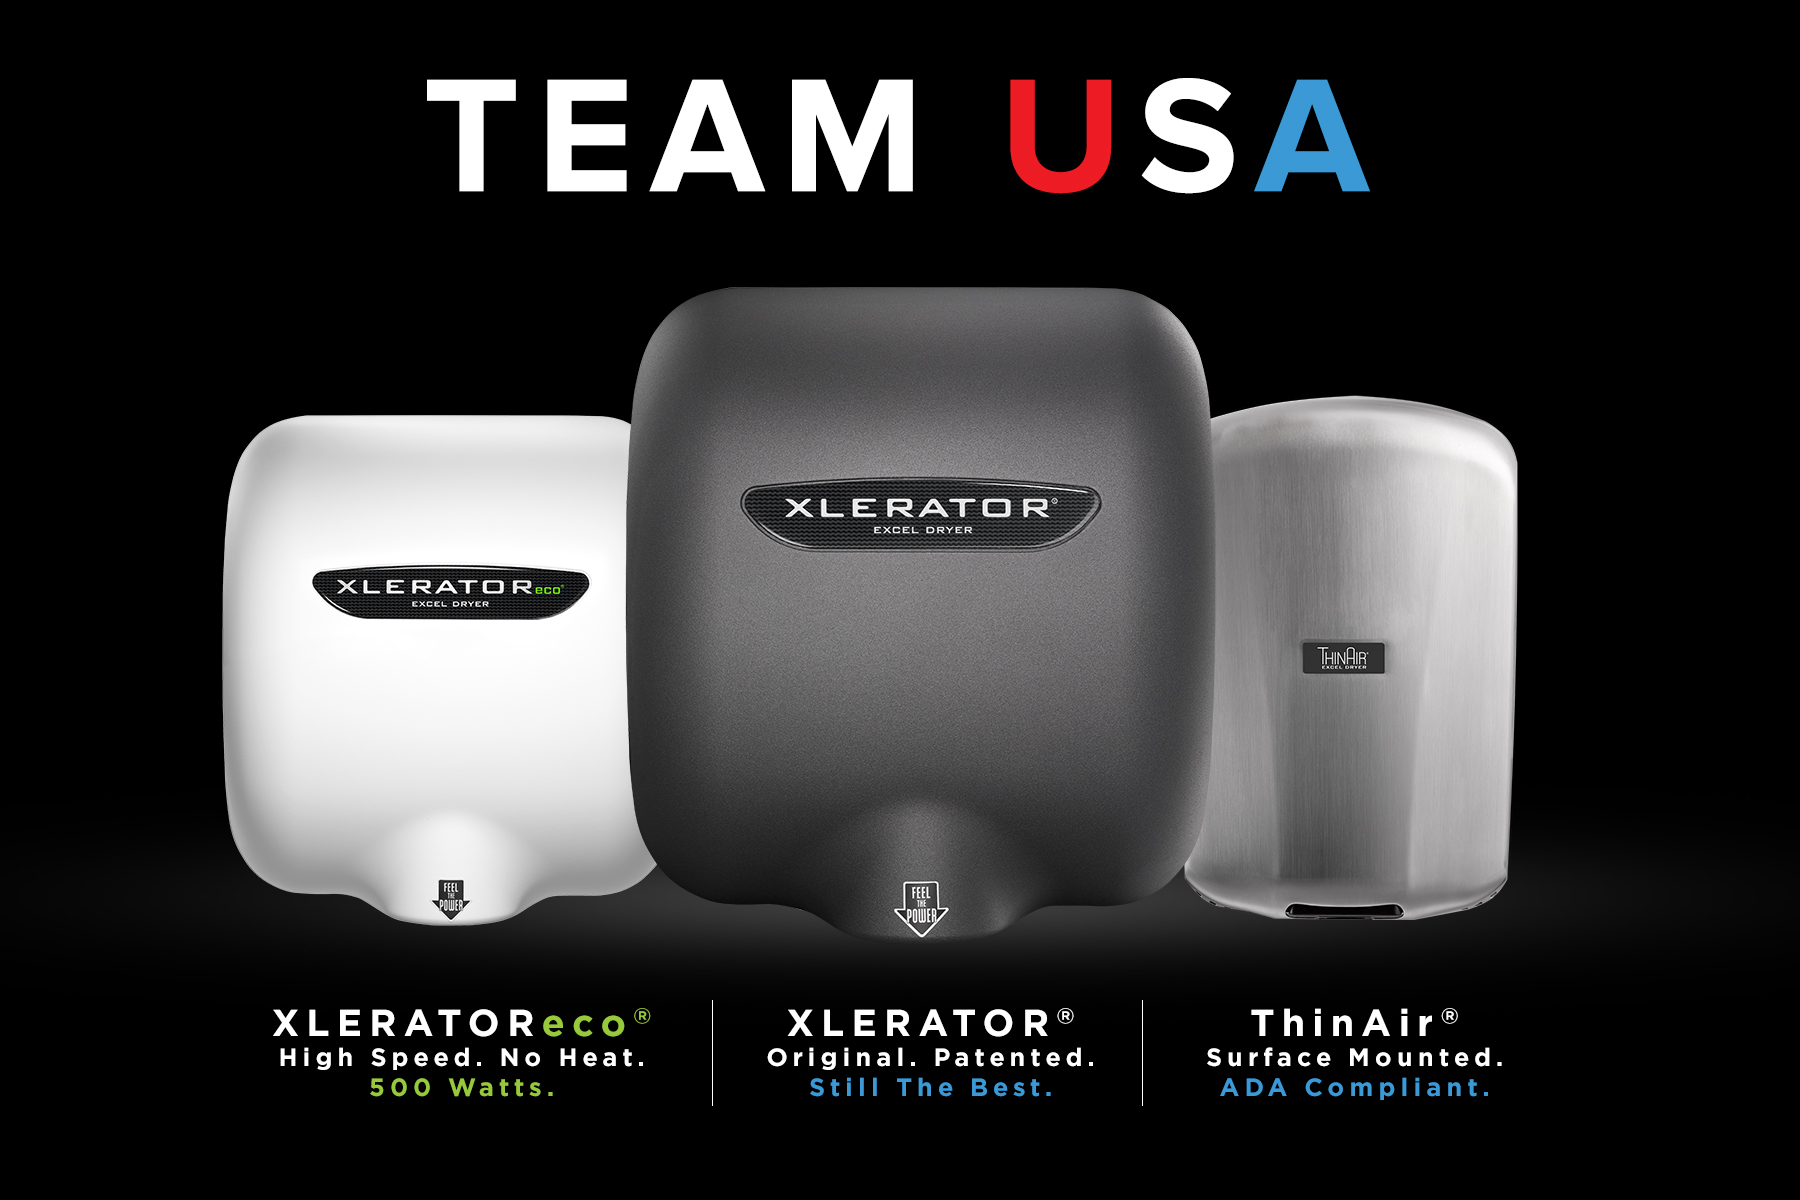 XLERATOR Hand Dryers on a black background under text that reads ‘Team USA’ 